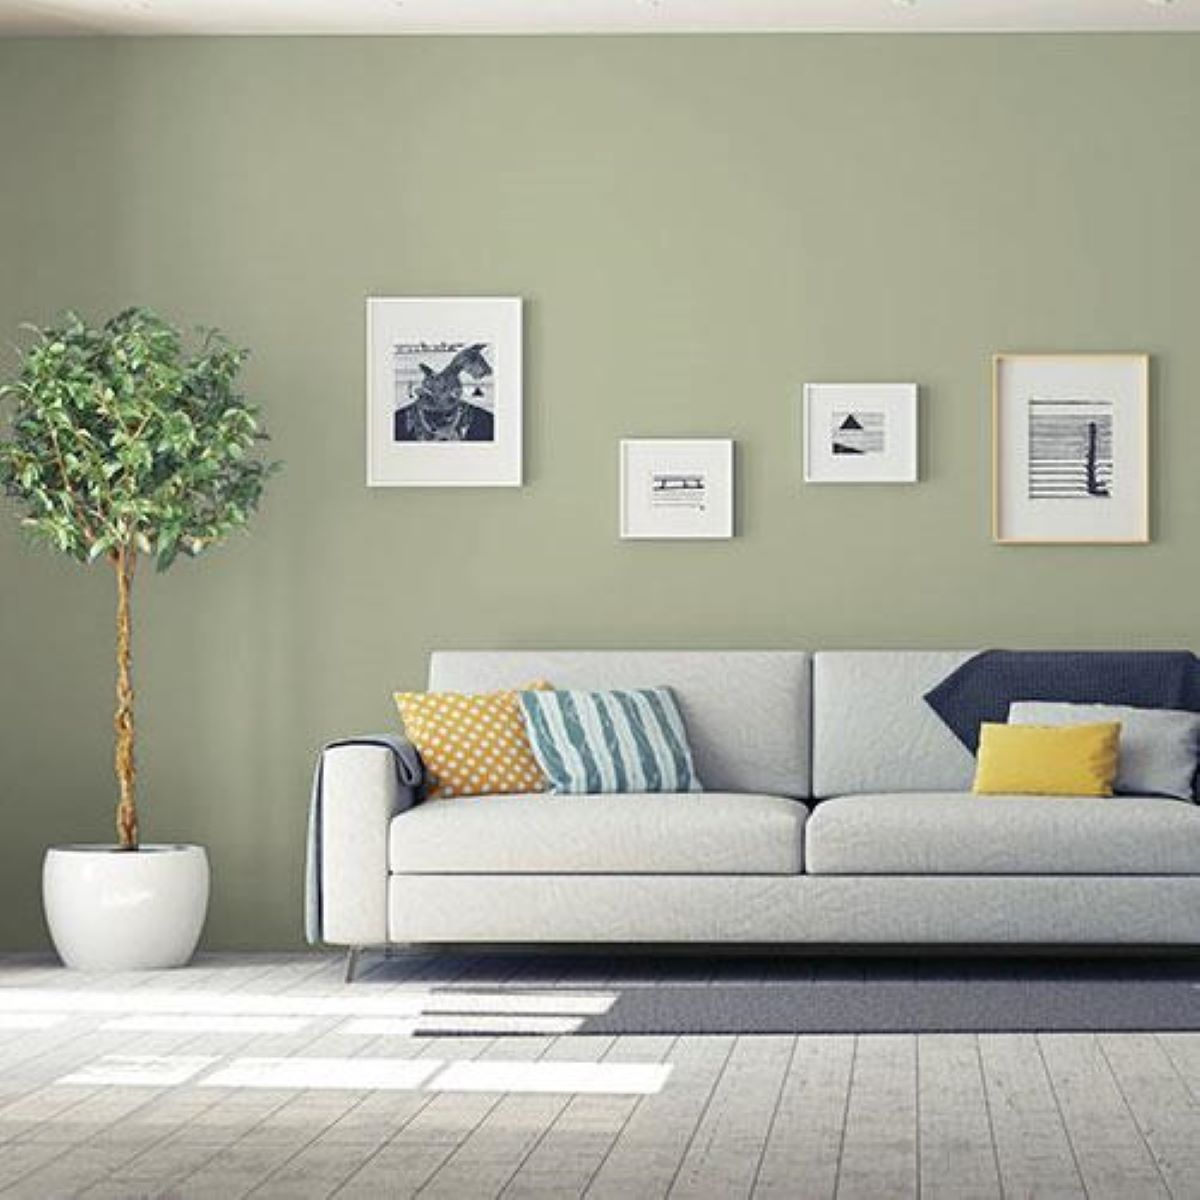 wall-and-trim-color-combinations - olive wall color